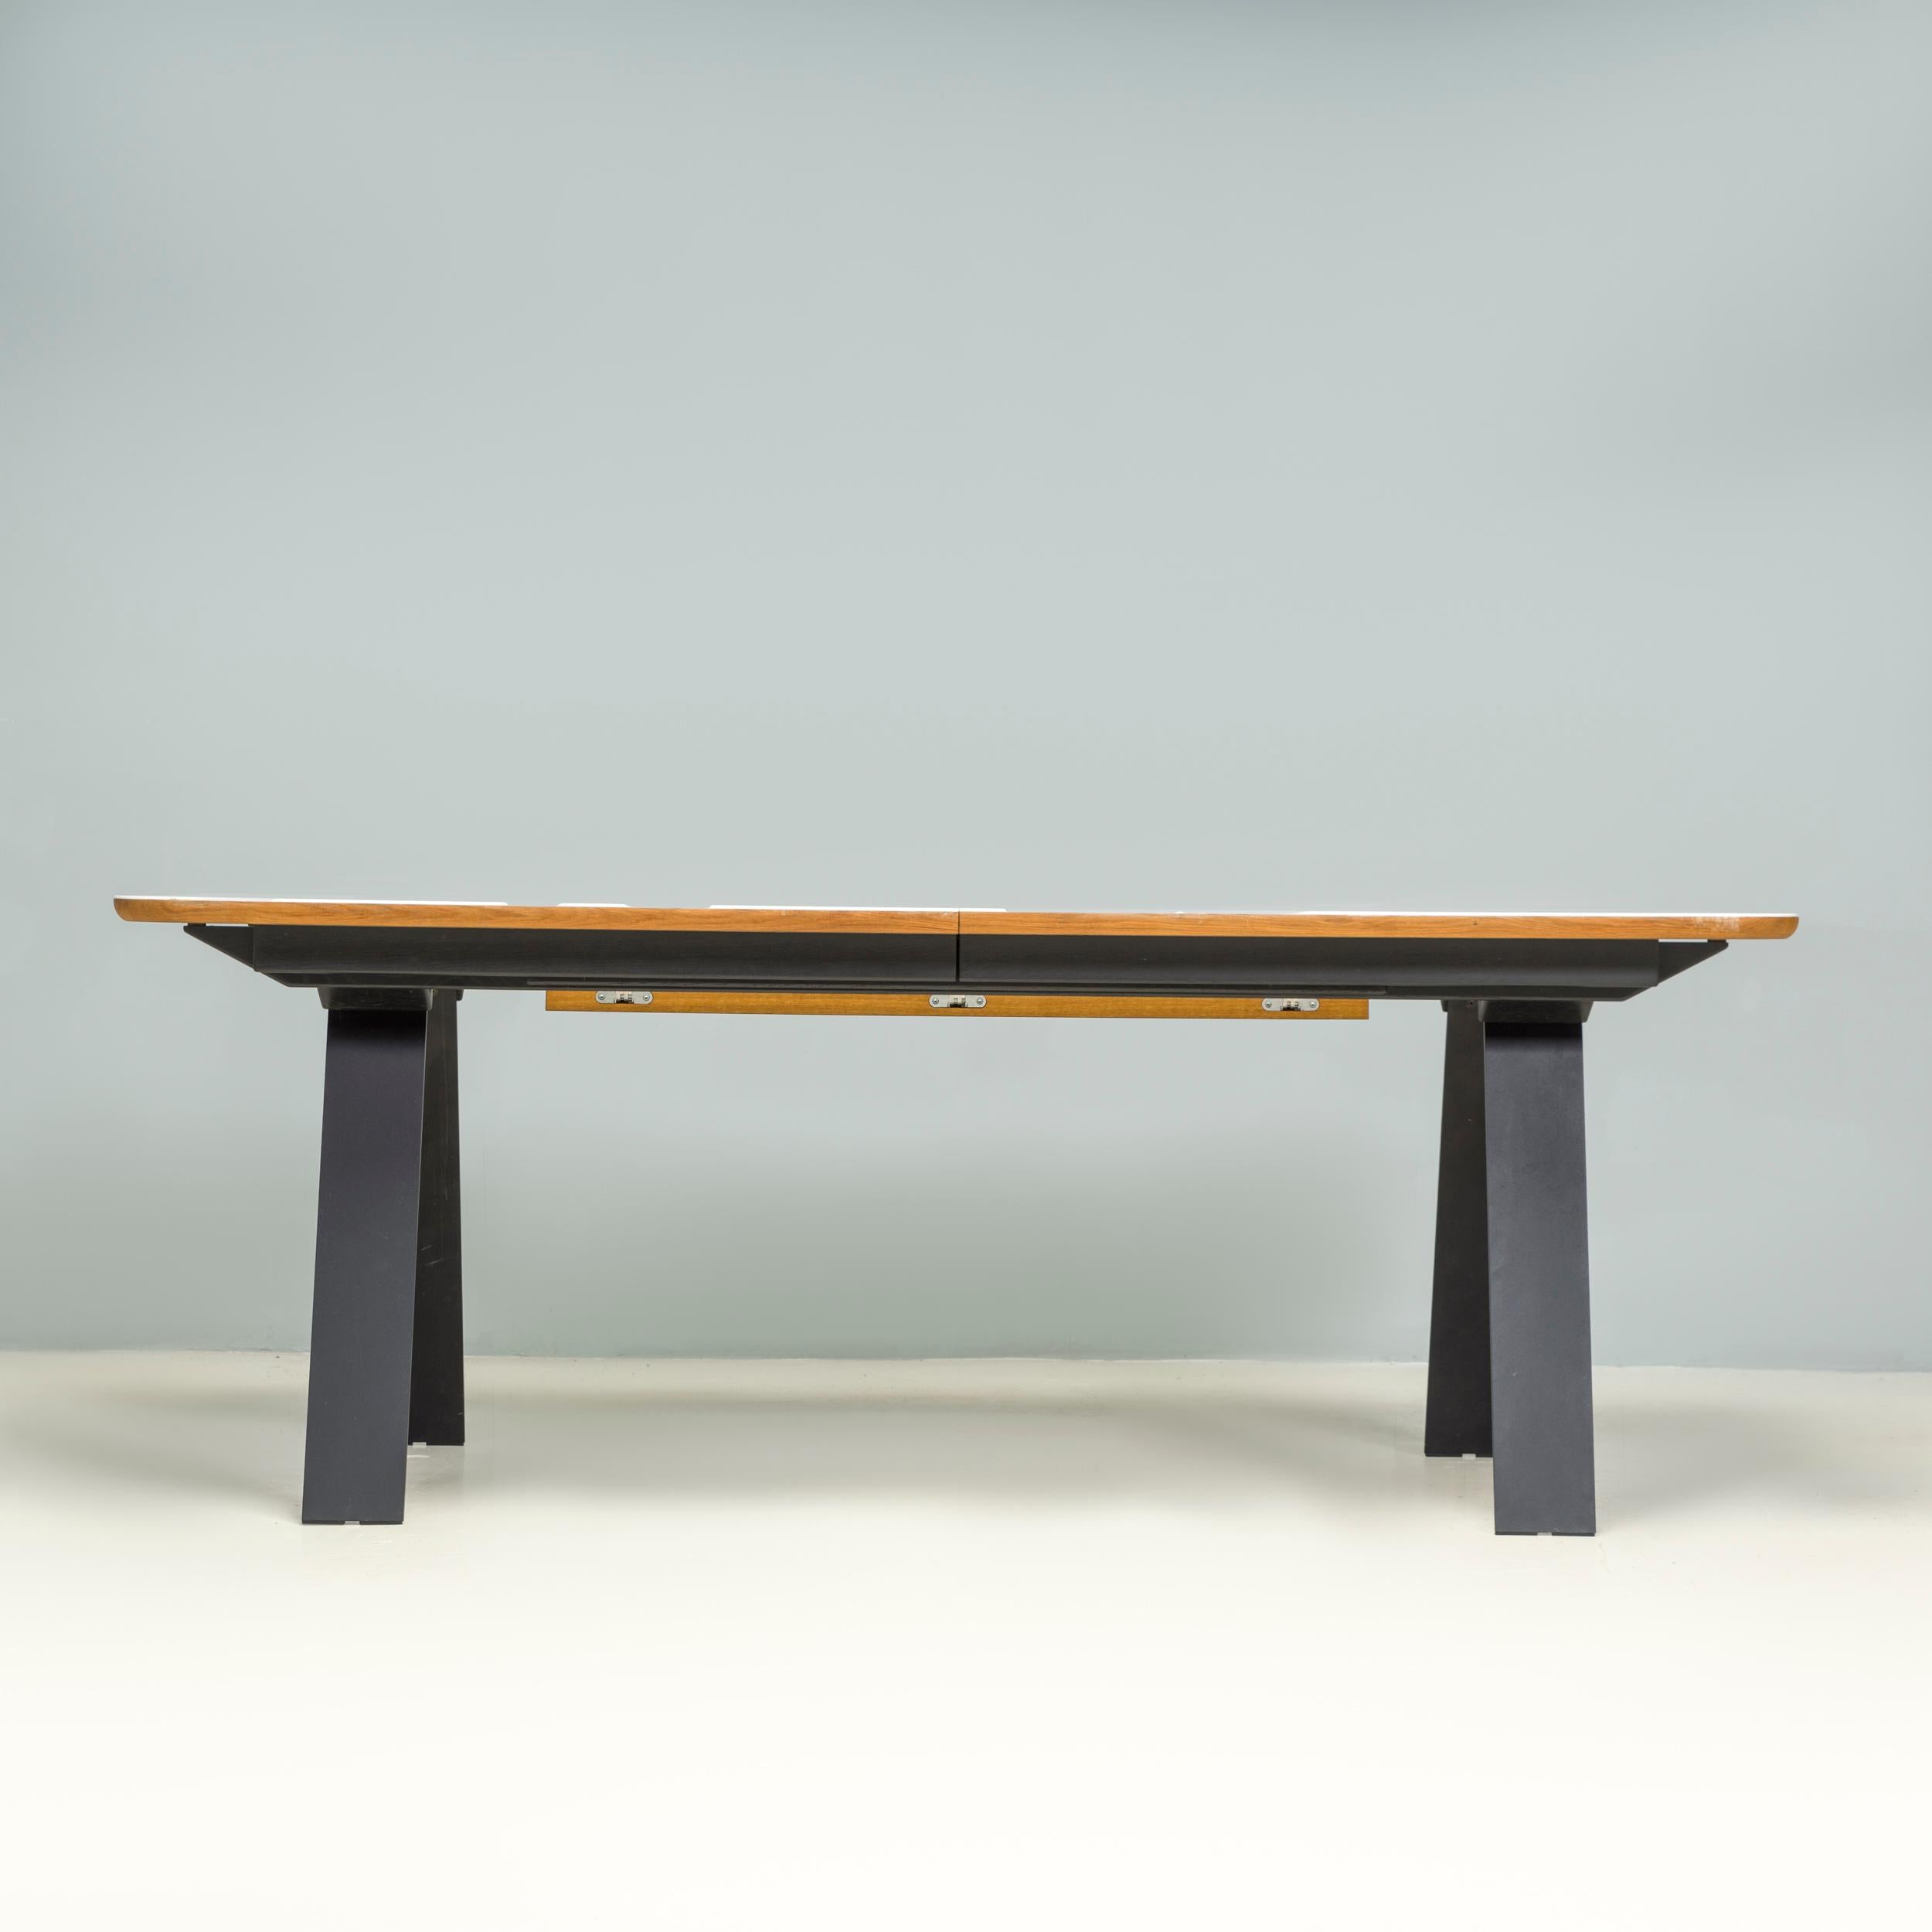 Nissen & Gehl MDD for Naver GM 3400 Chess Extending Dining Table, 2018 In Good Condition For Sale In London, GB